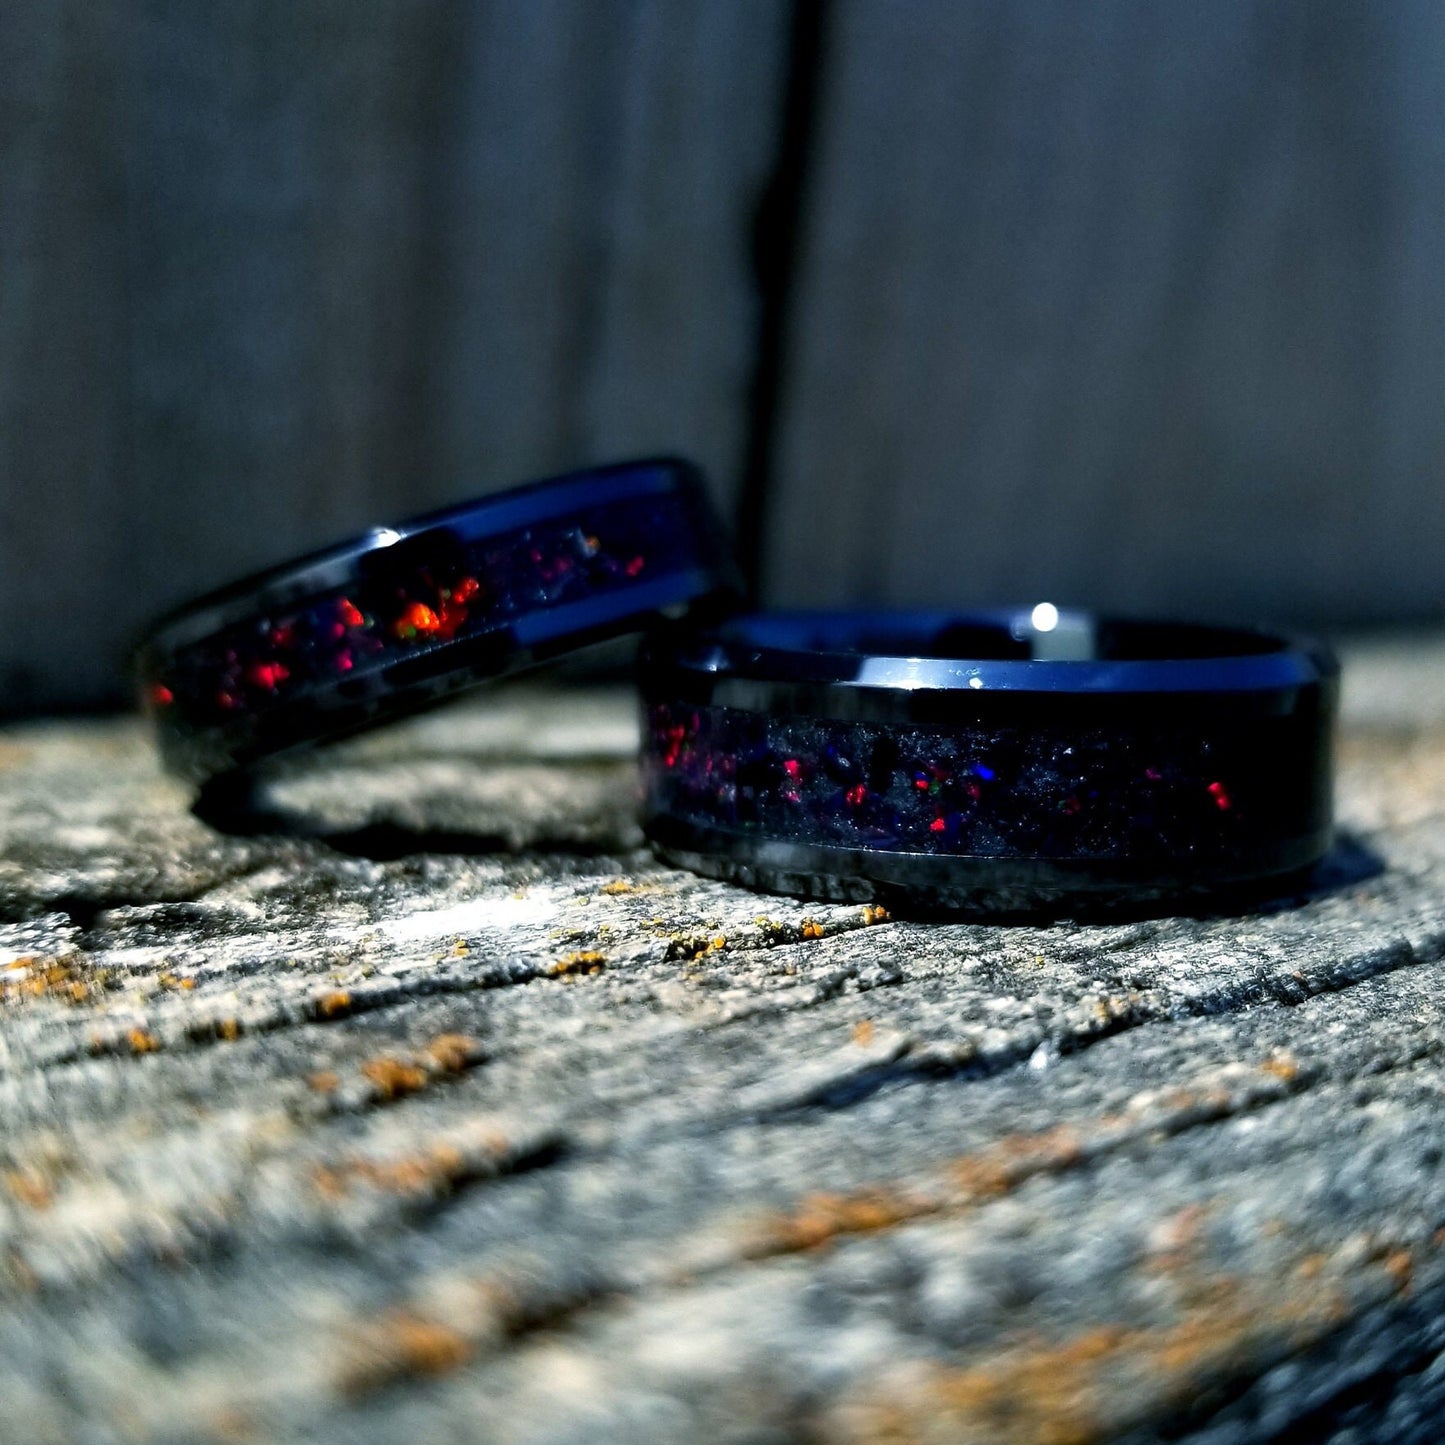 His and Hers Wedding Ring Set. Opal rings. Black ceramic ring set with black fire opal and glowstone inlay. 8mm and 6mm rings. Sizes 5-13